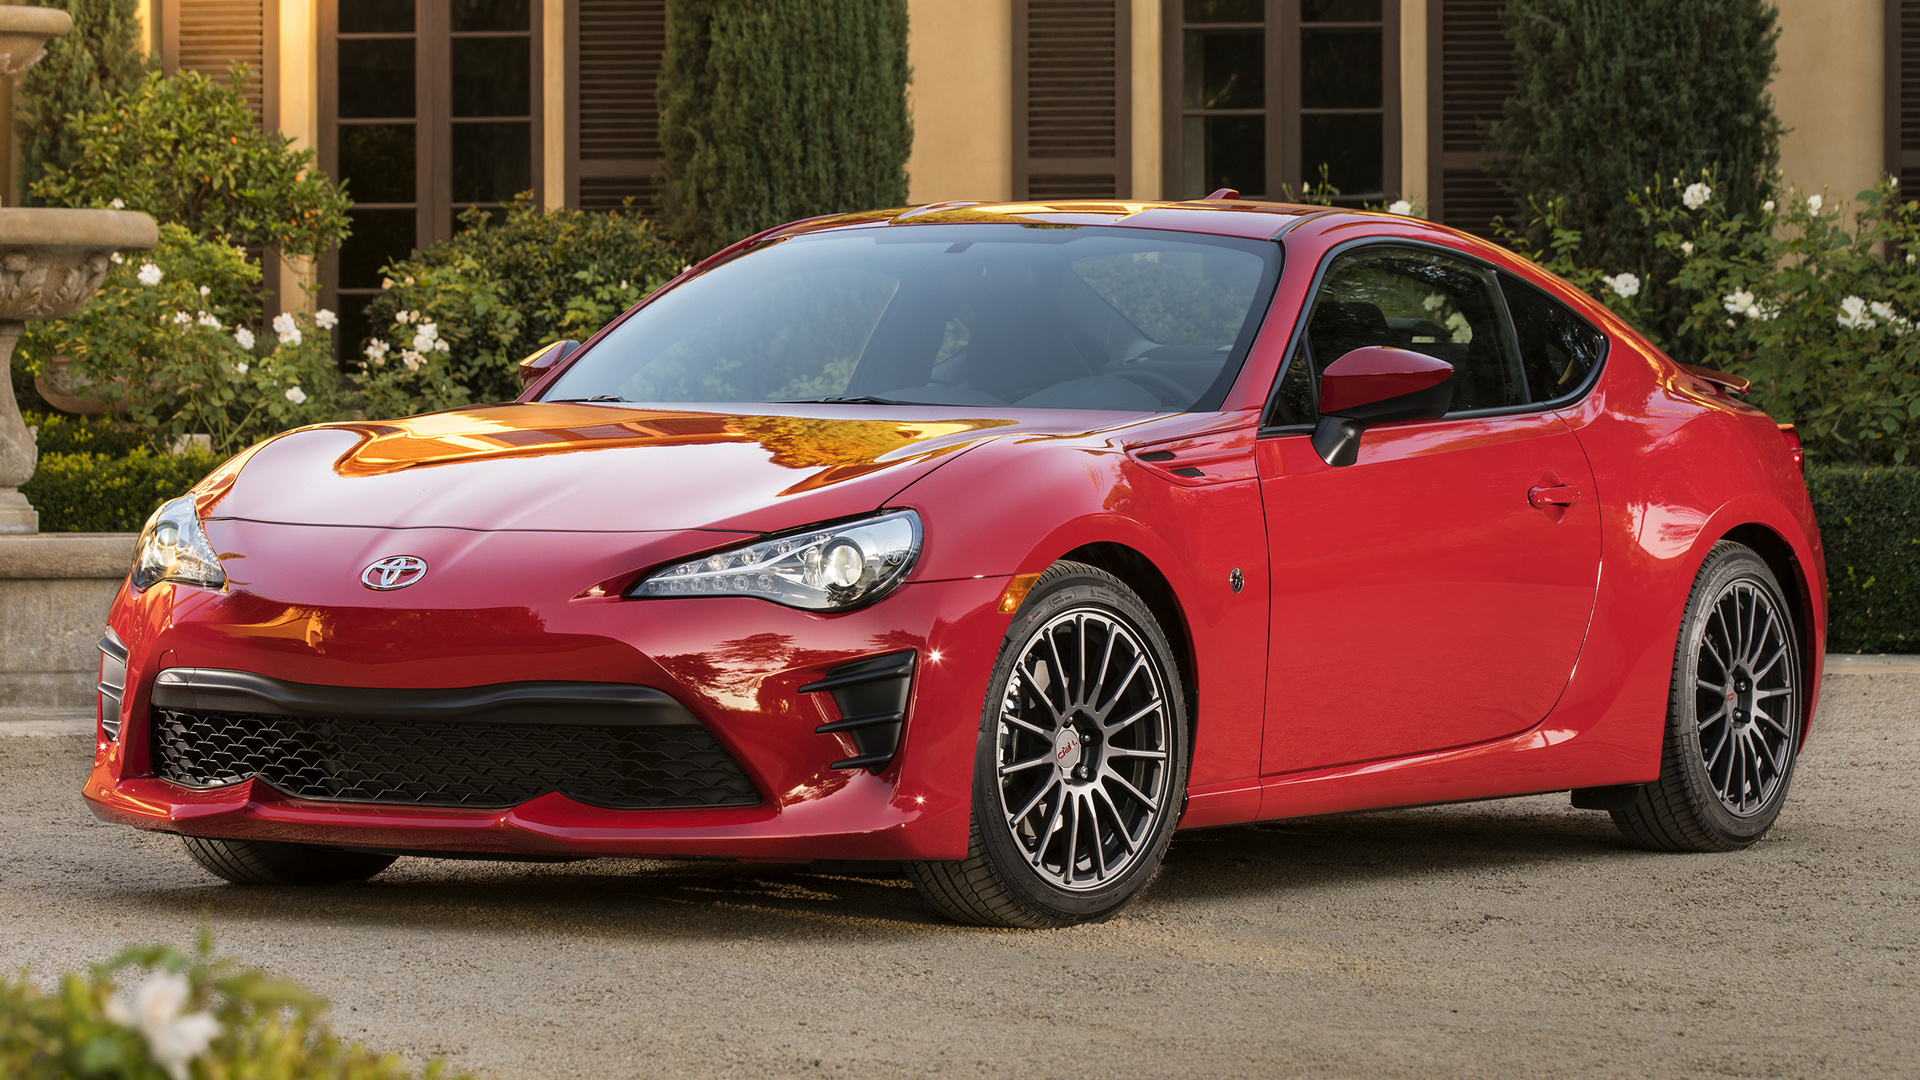 Toyota 86 2017 US Wallpapers and HD Images   Car Pixel